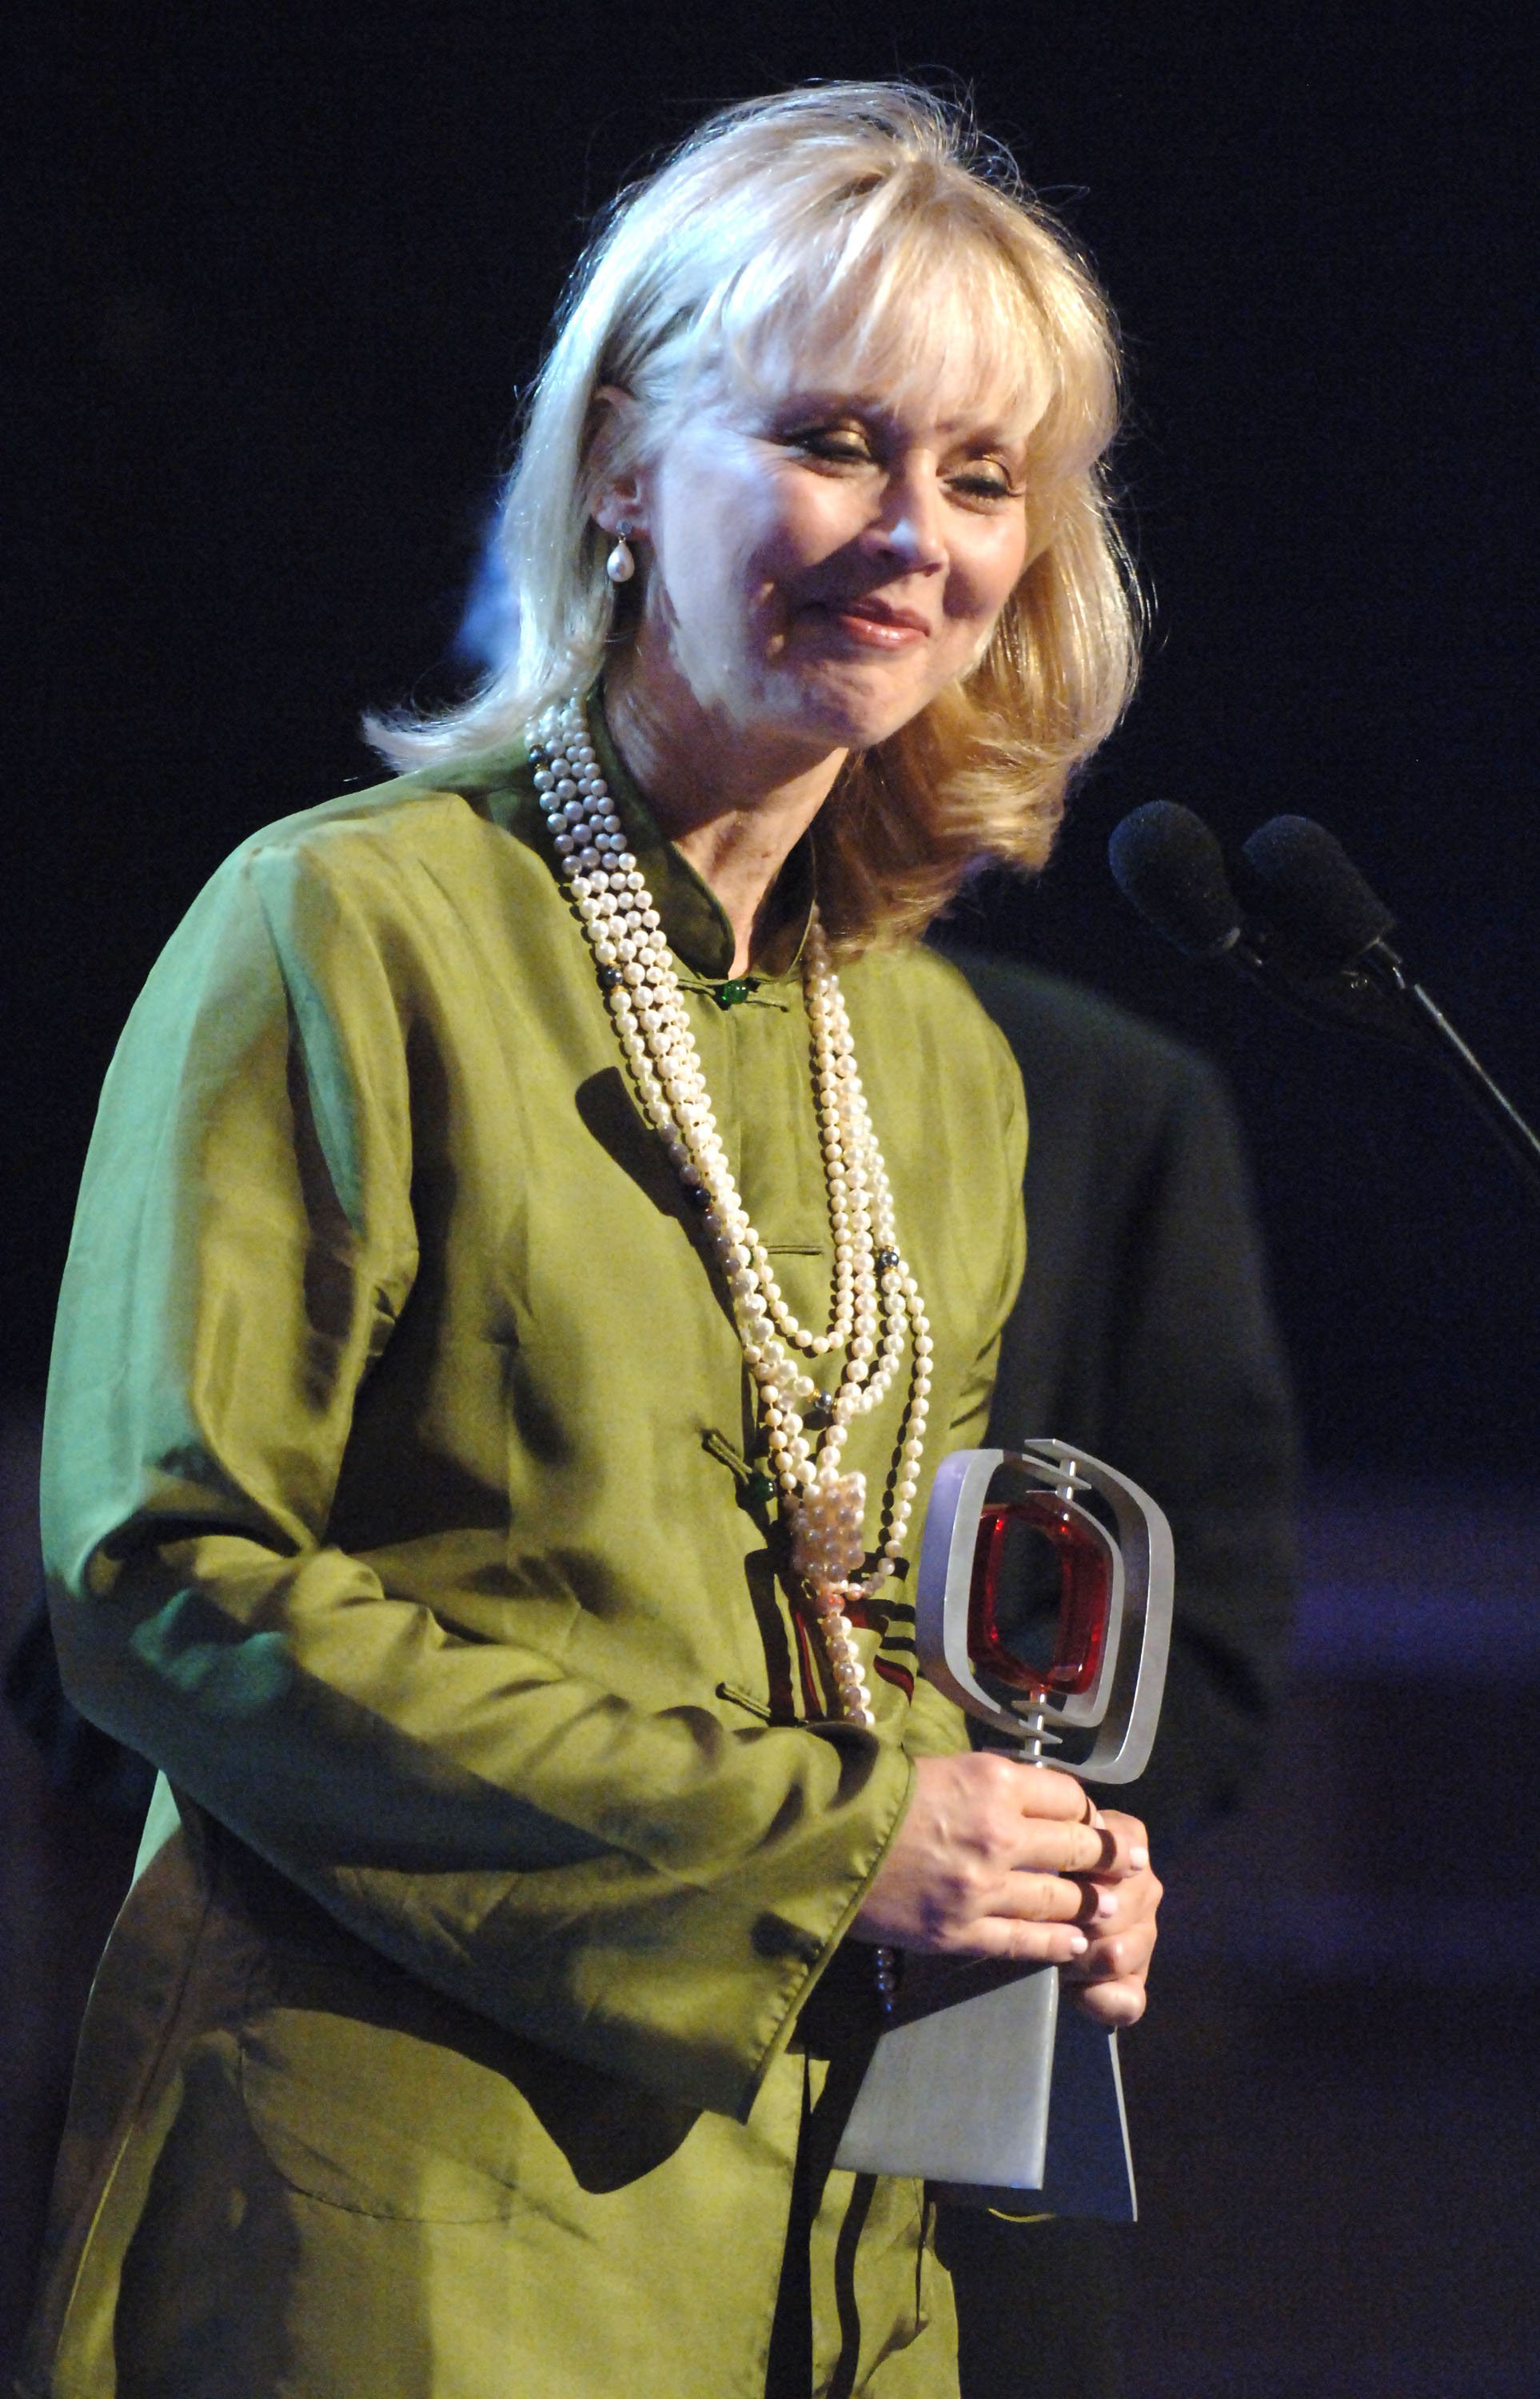 Shelley Long accepts Legend Award for Cheers during 2006 TV Land Awards, Santa Monica, California, United States | Photo: Getty Images